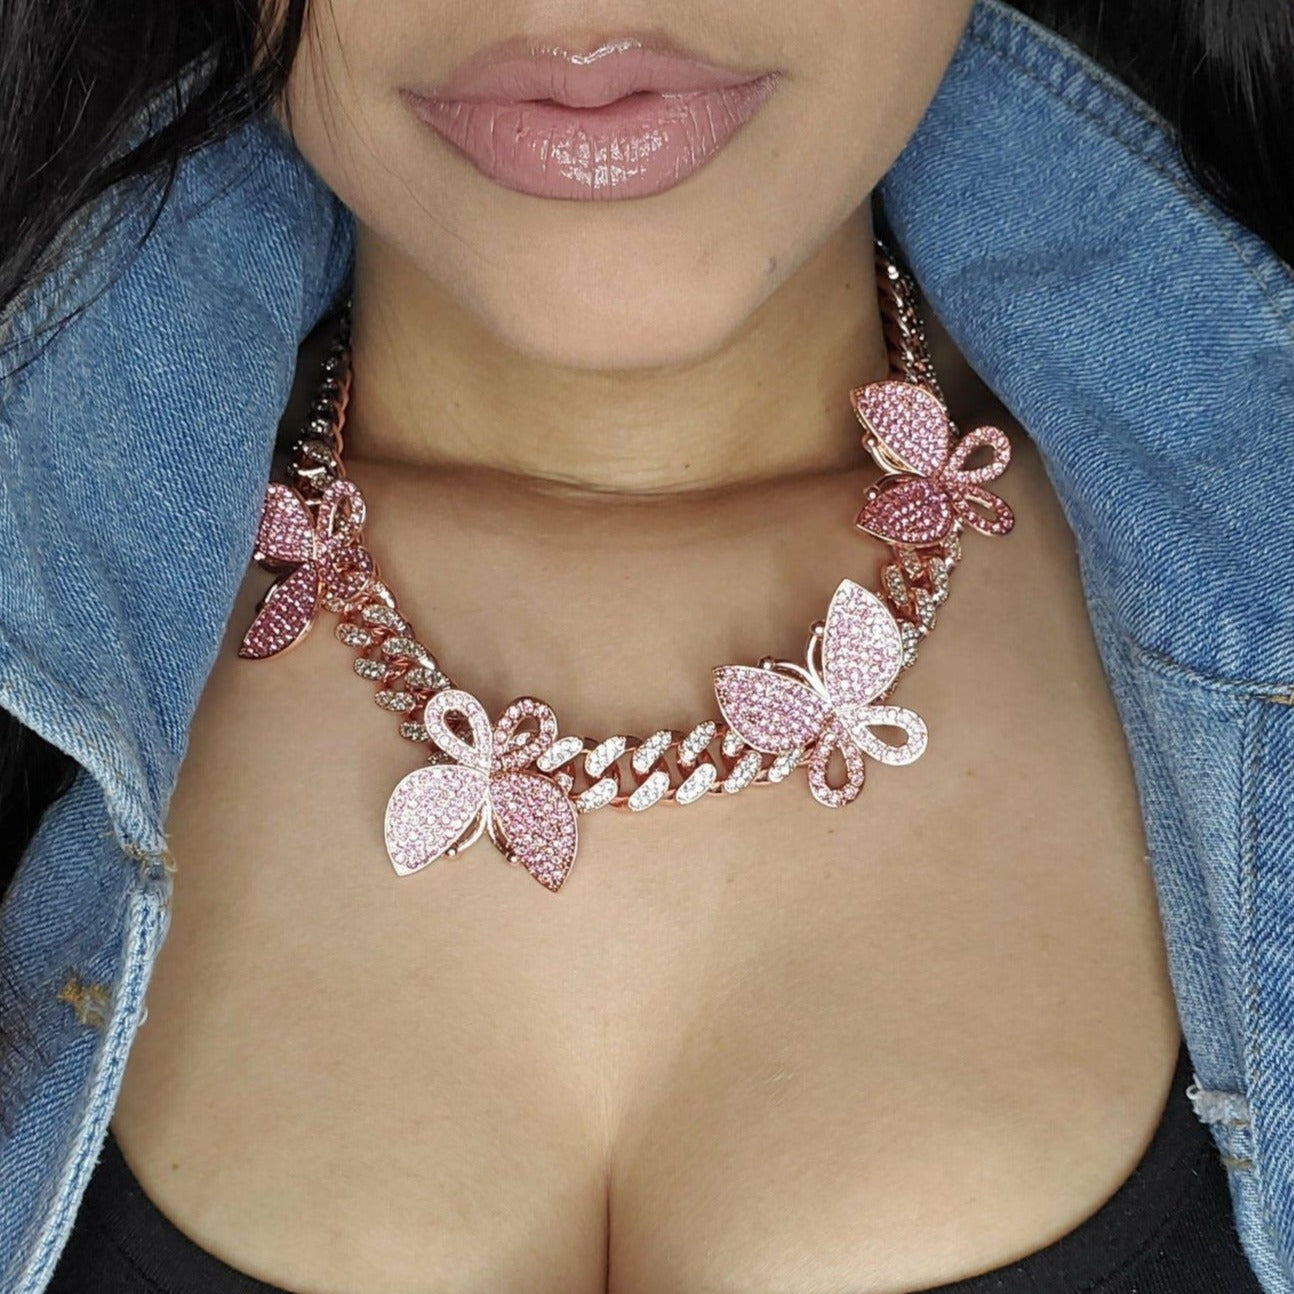 butterfly cuban link necklace. butterfly is 13mm. cubic zirconia gems. rose gold plated over rhodium 